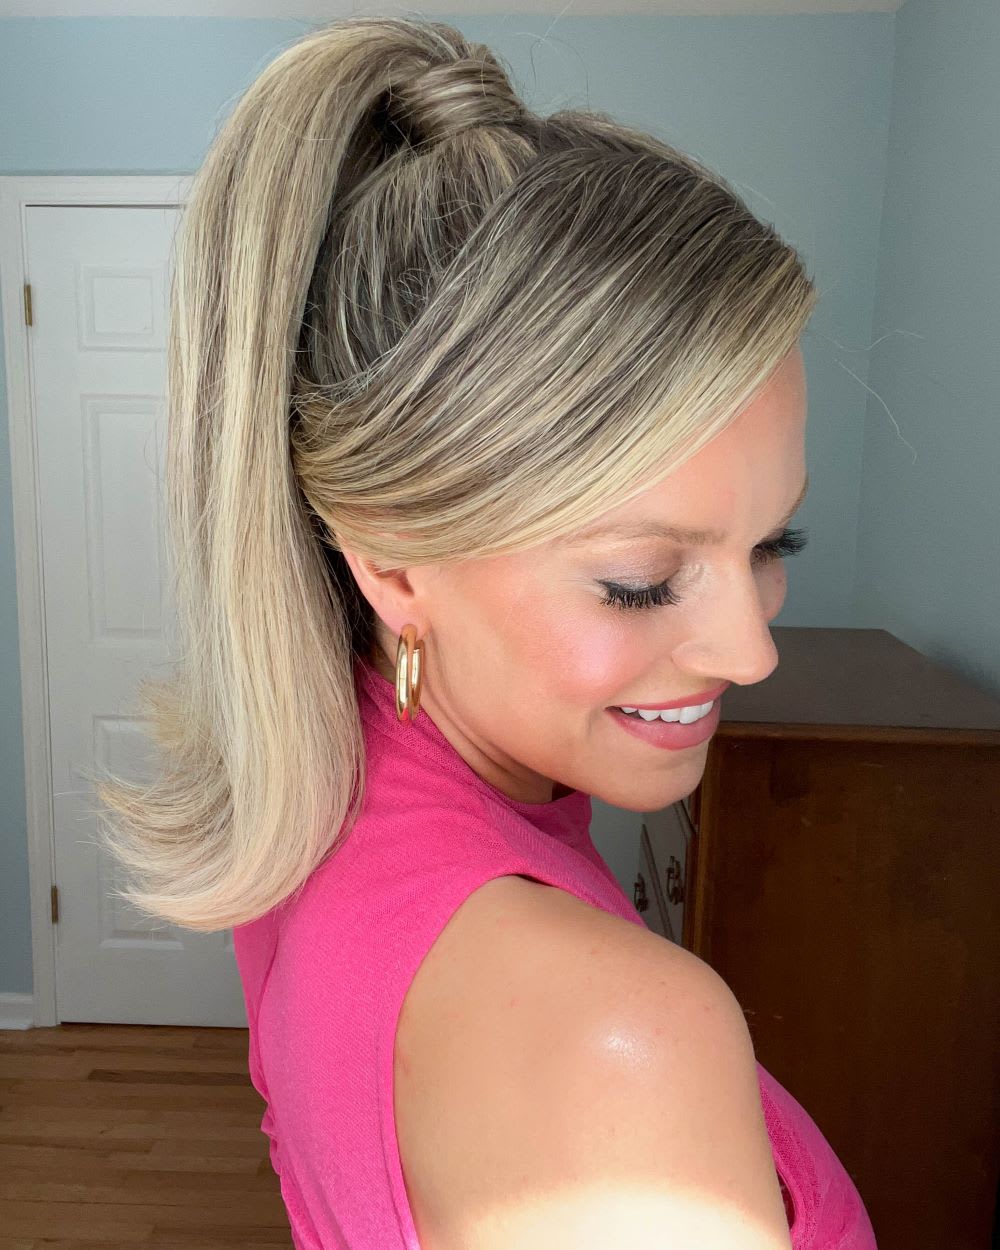 Super Sleek Barbie Ponytail  hairstyle ponytail Barbie Black Girl  Magic artificial hair integrations  Get into this Barbie Ponytail for ur  summer look Ali Pearl Official Store httpsbitlyFBAlipearlHair     